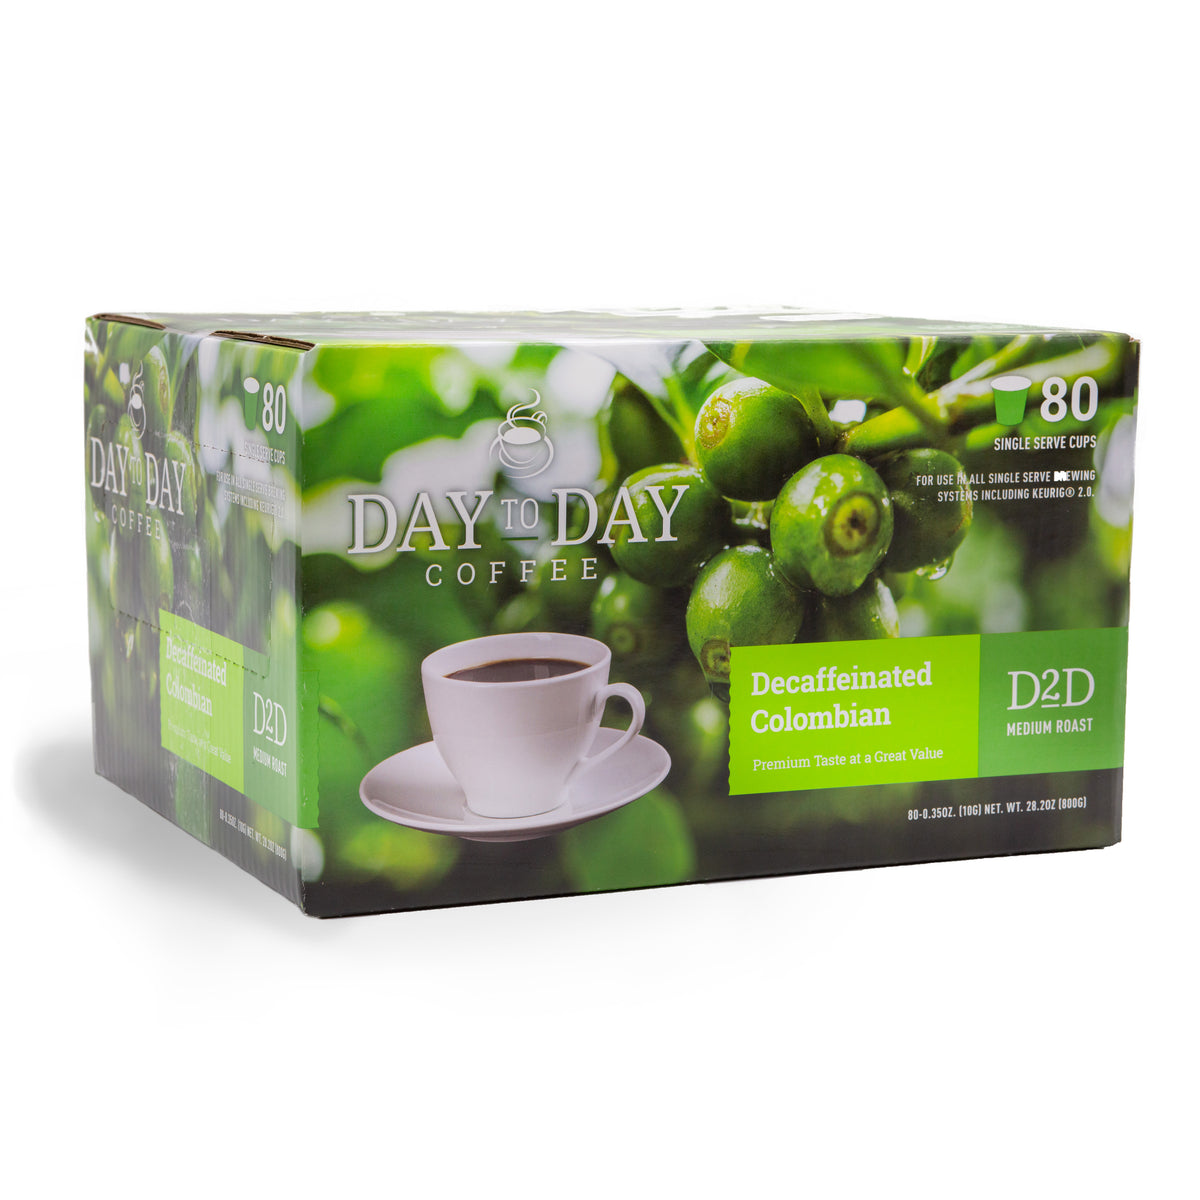 Day to day coffee 80 count decaffeinated colombian light roast coffee pods for single serve coffee brewer